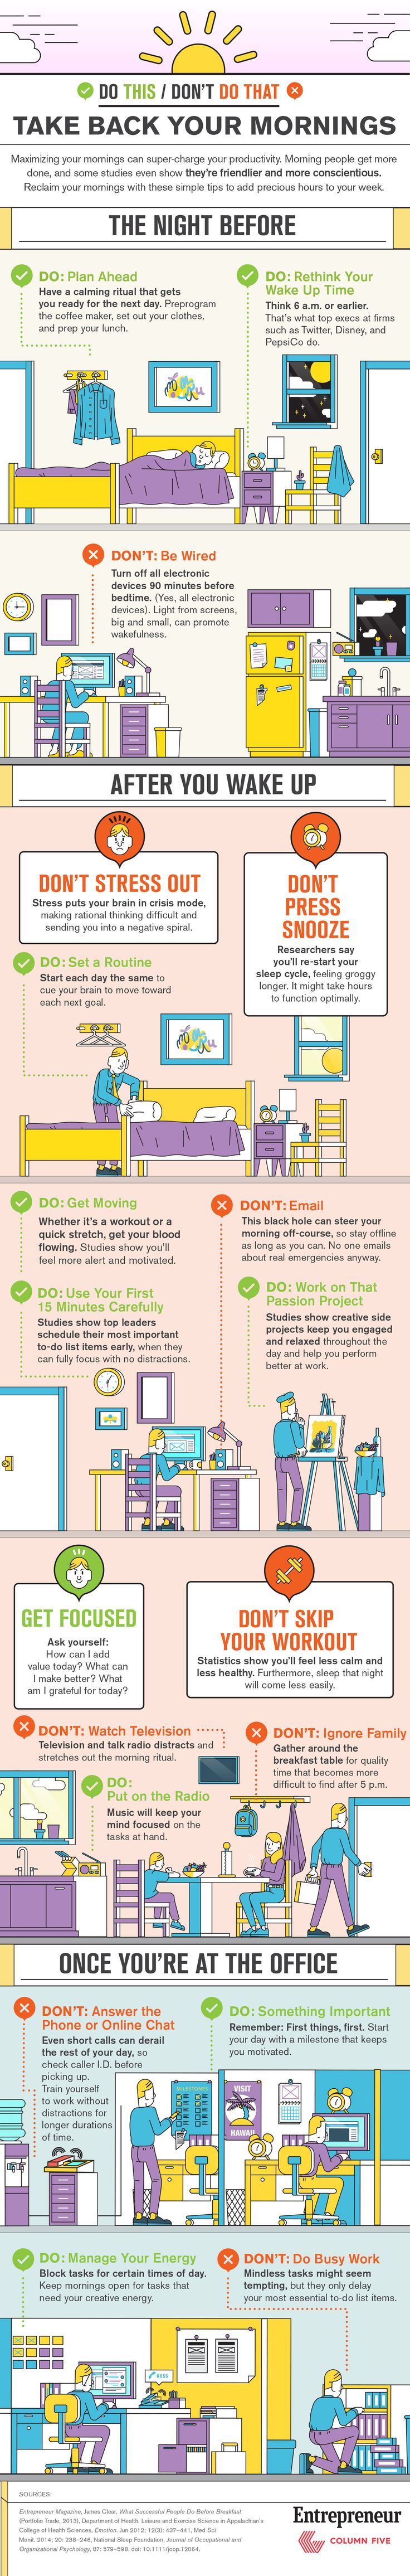 Take Back Your Mornings (Infographic)